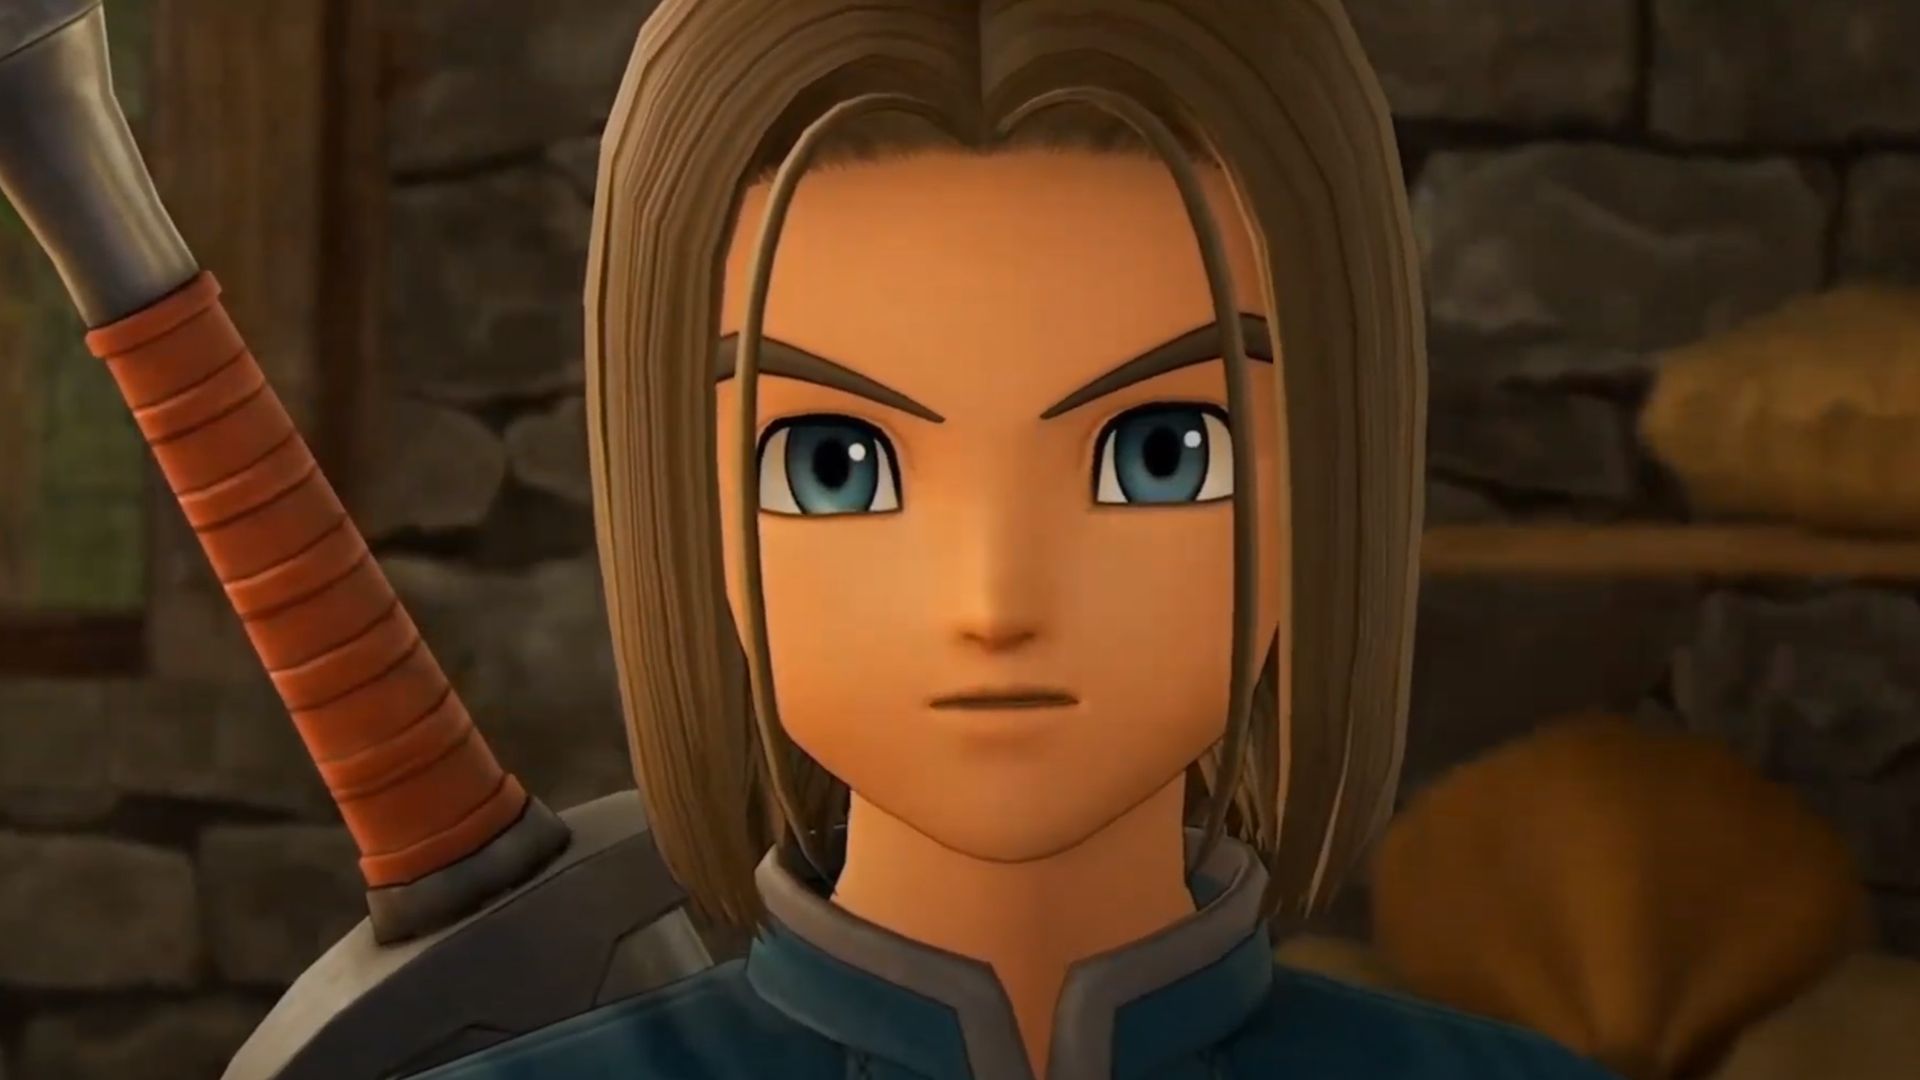 There are still “no plans for a worldwide release” of Dragon Quest X